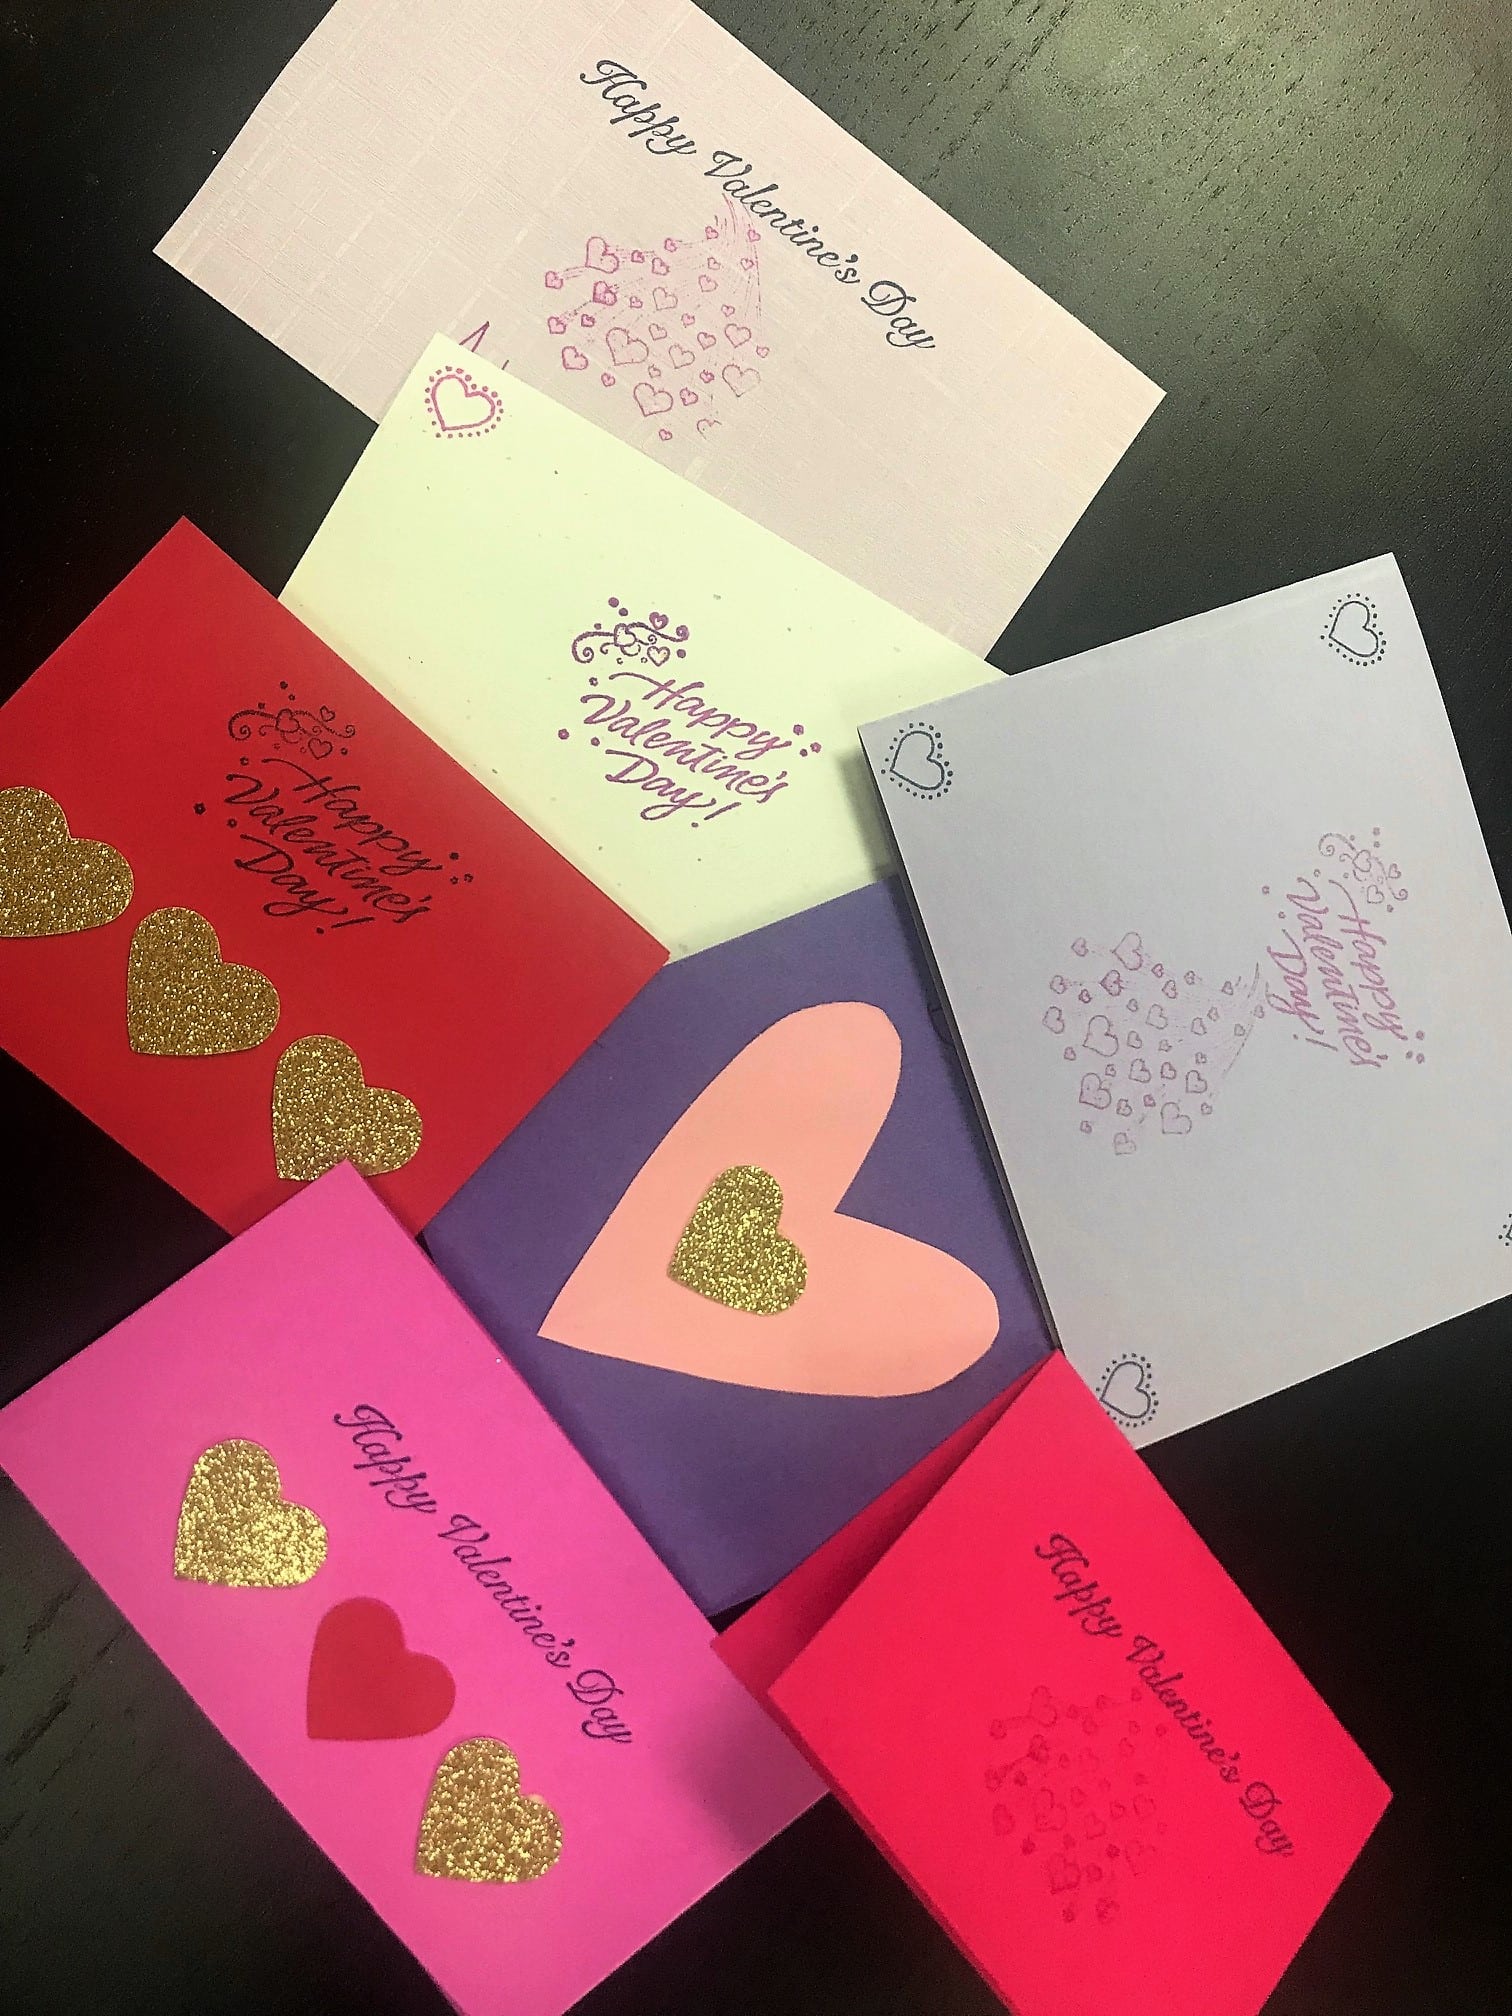 Project Valentine: Philanthropy with Love